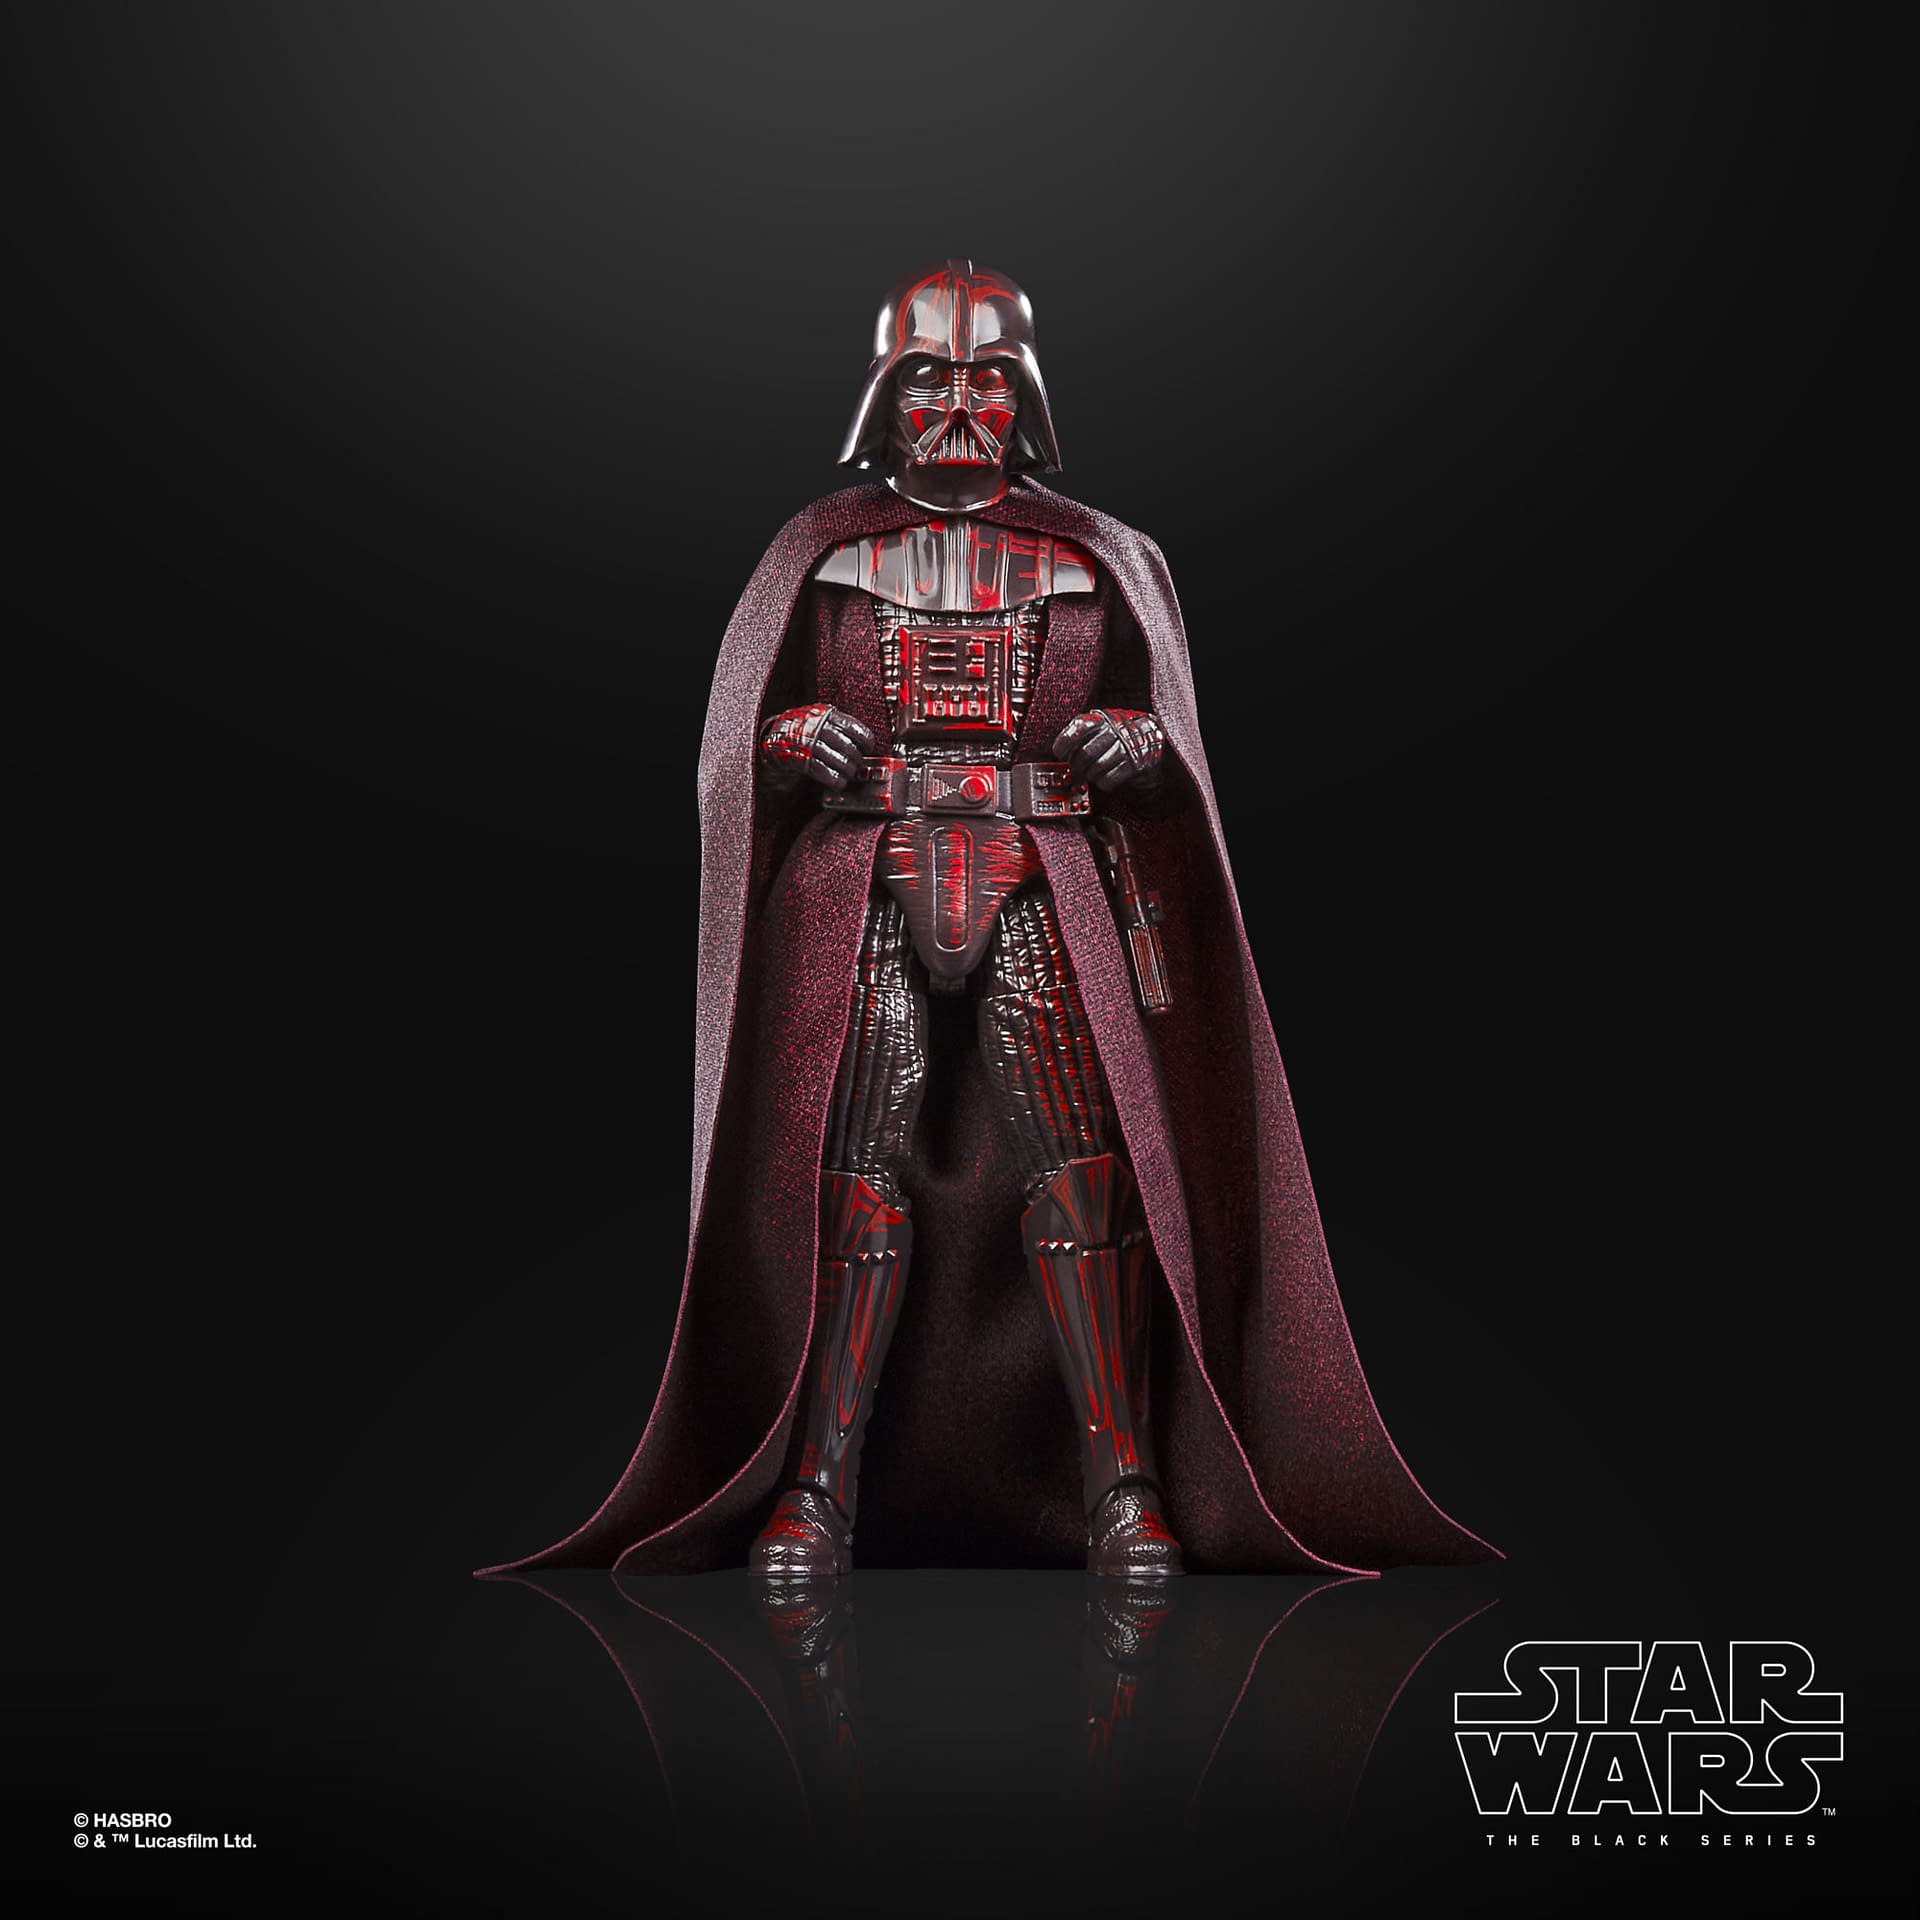 Star Wars Celebration Exclusive Darth Vader Revealed from Hasbro 